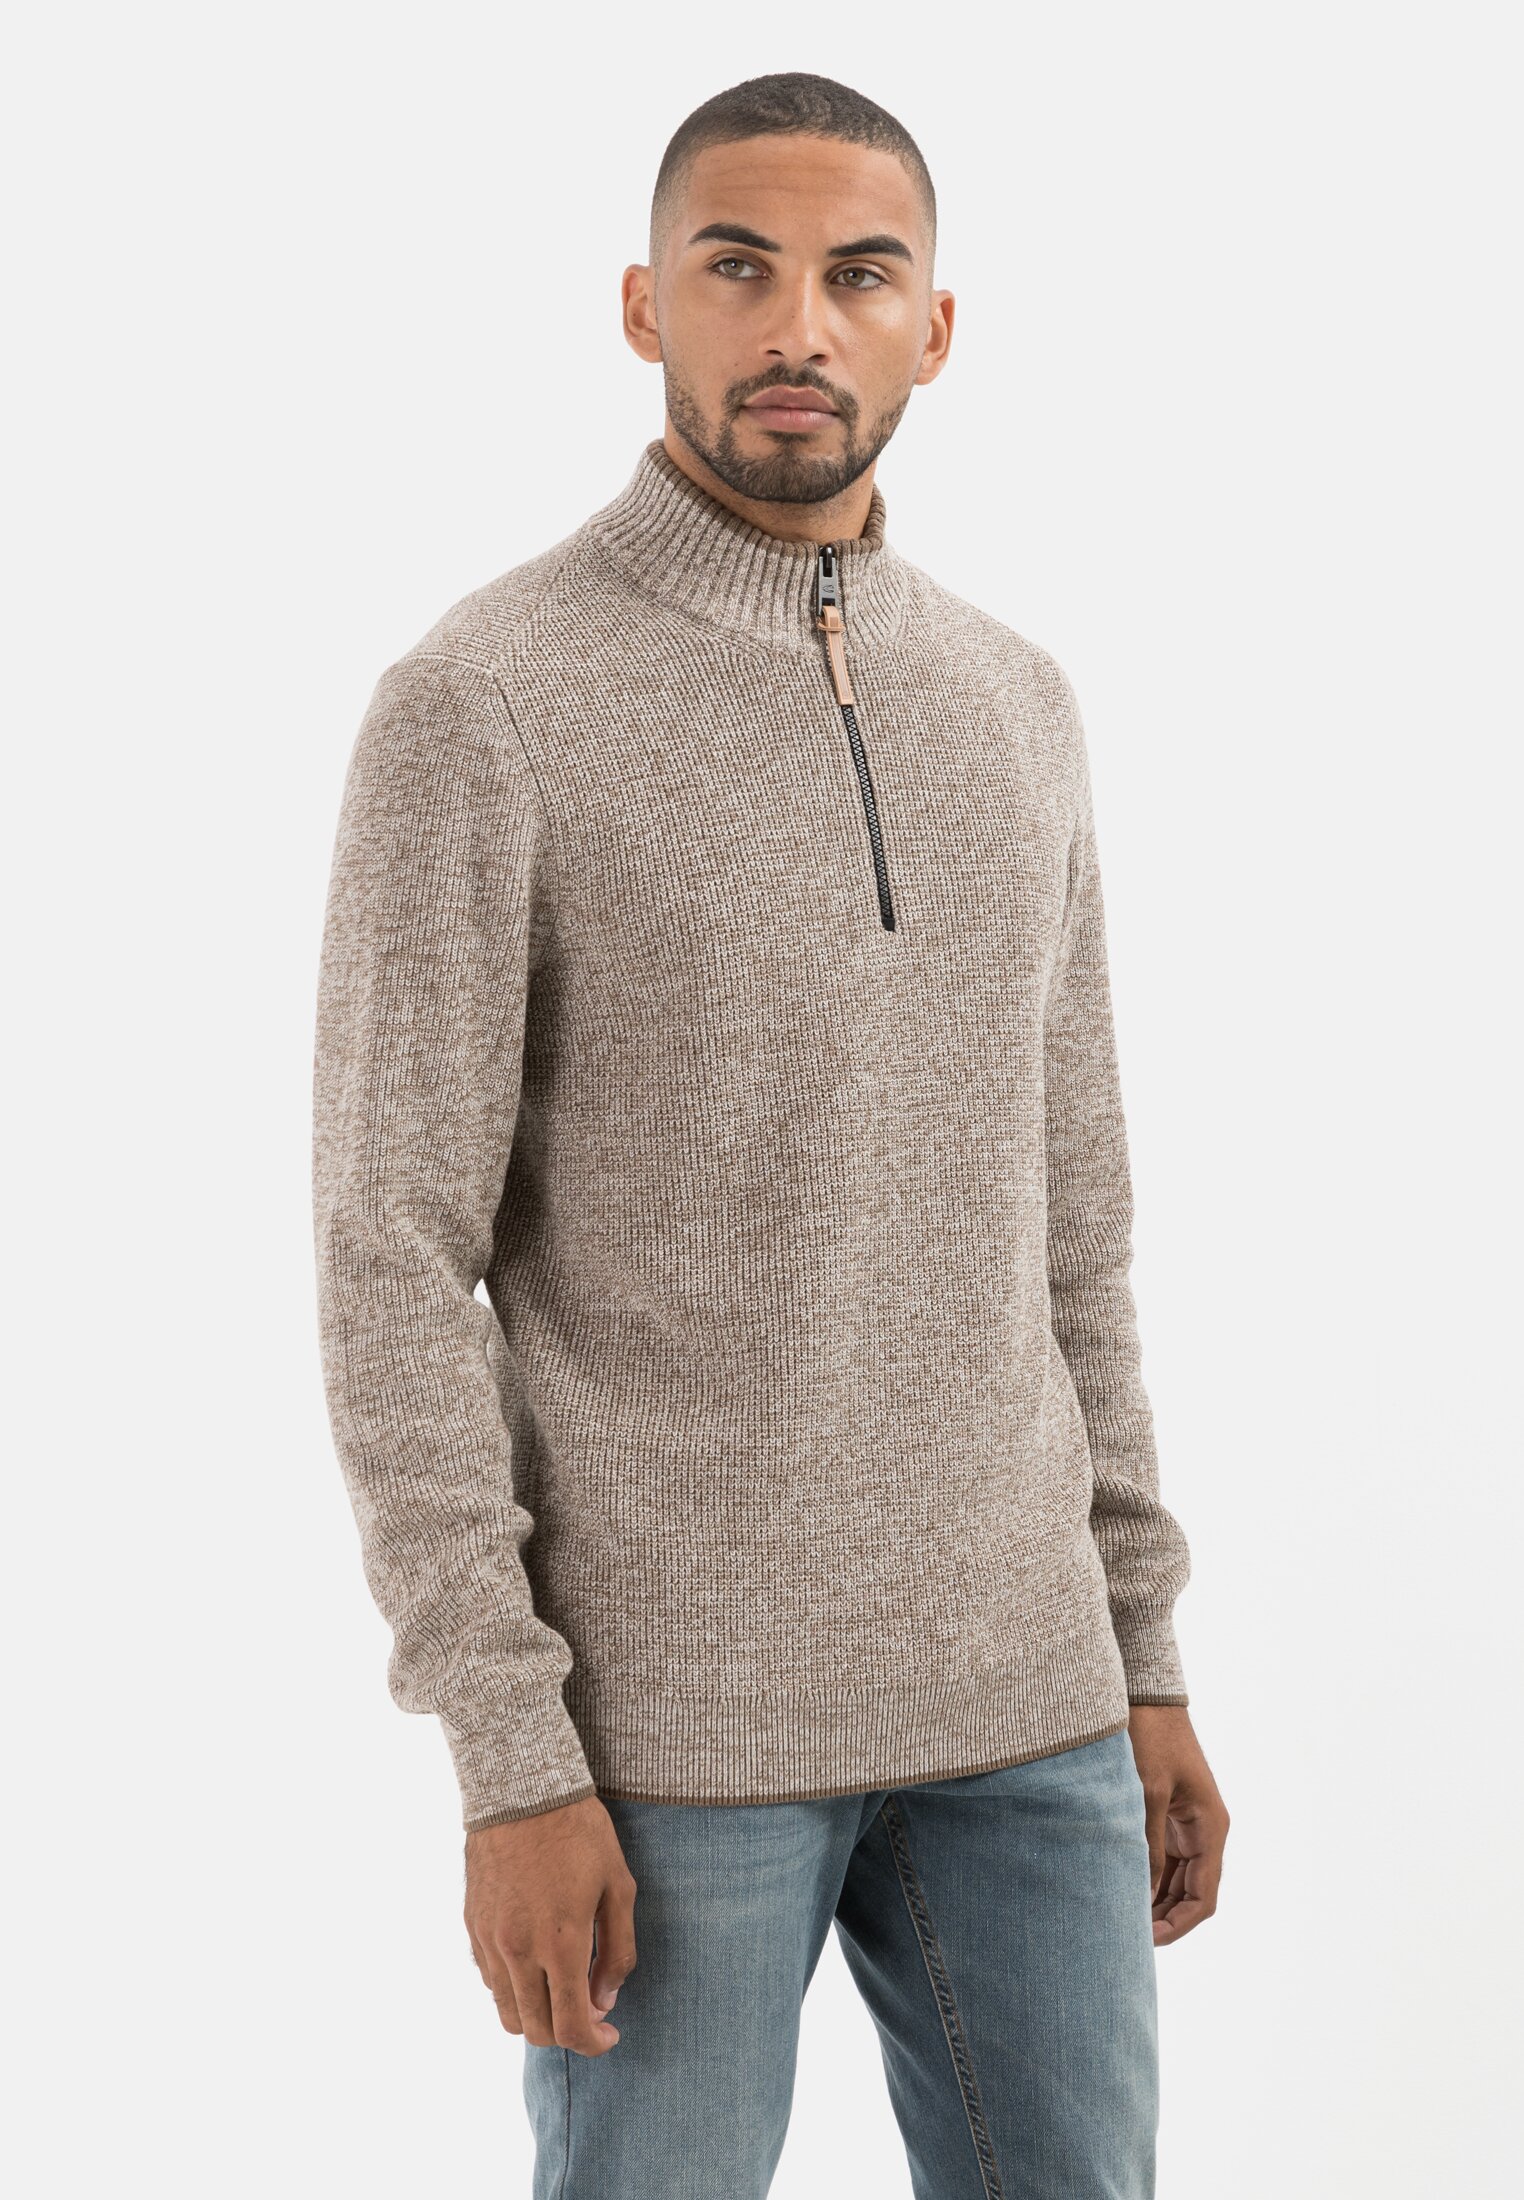 Camel Active Knit jumper made from cotton mix